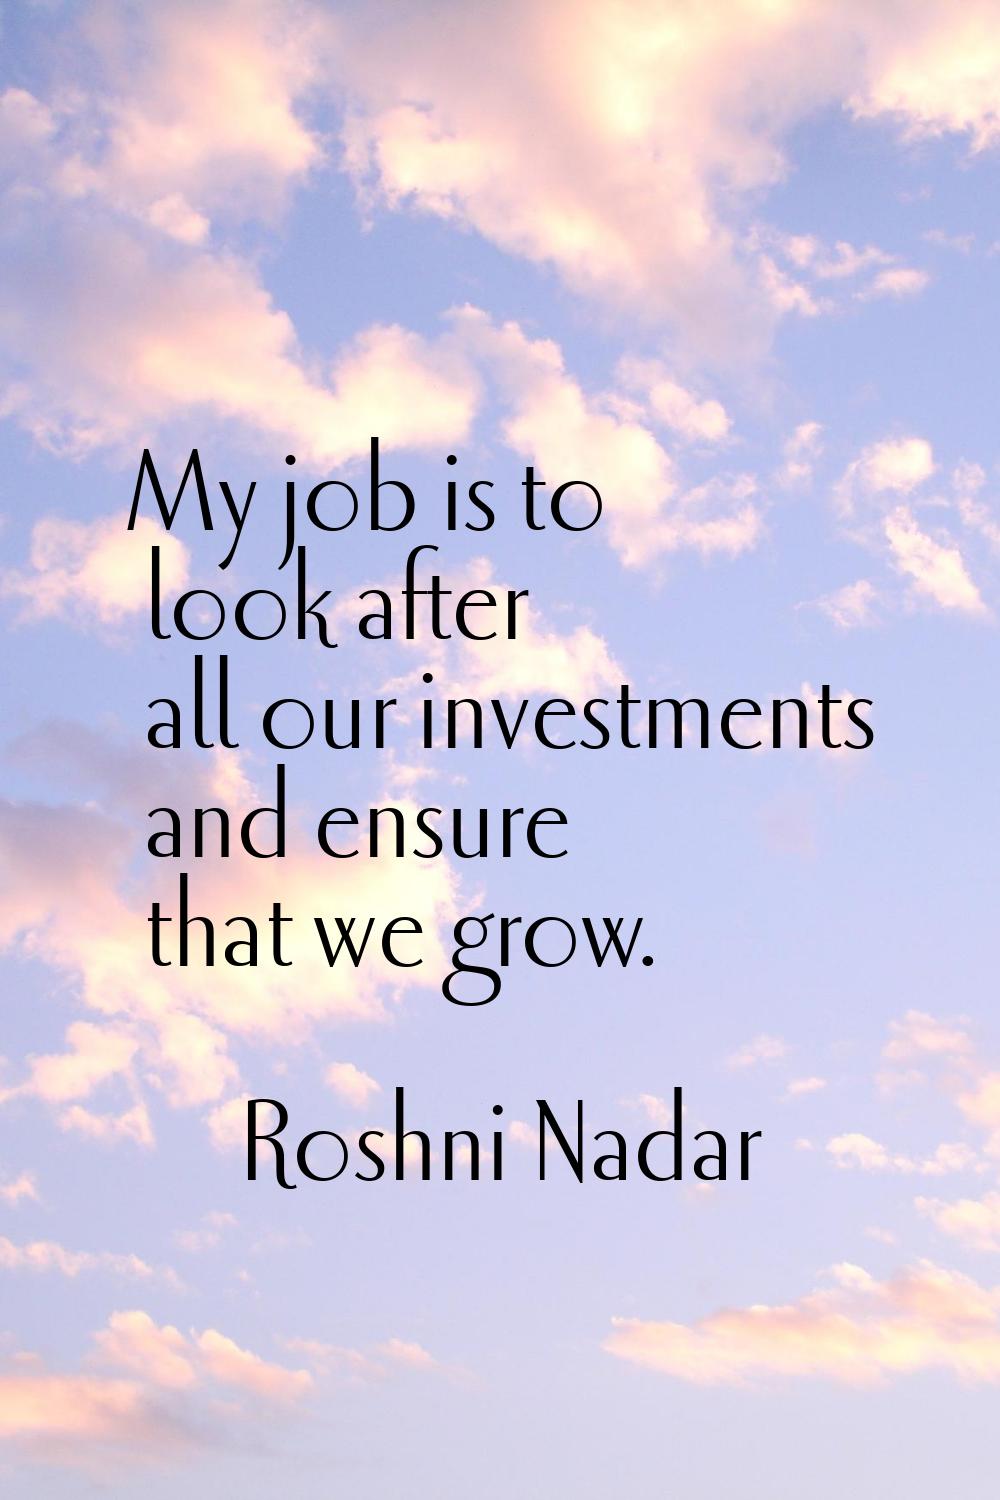 My job is to look after all our investments and ensure that we grow.